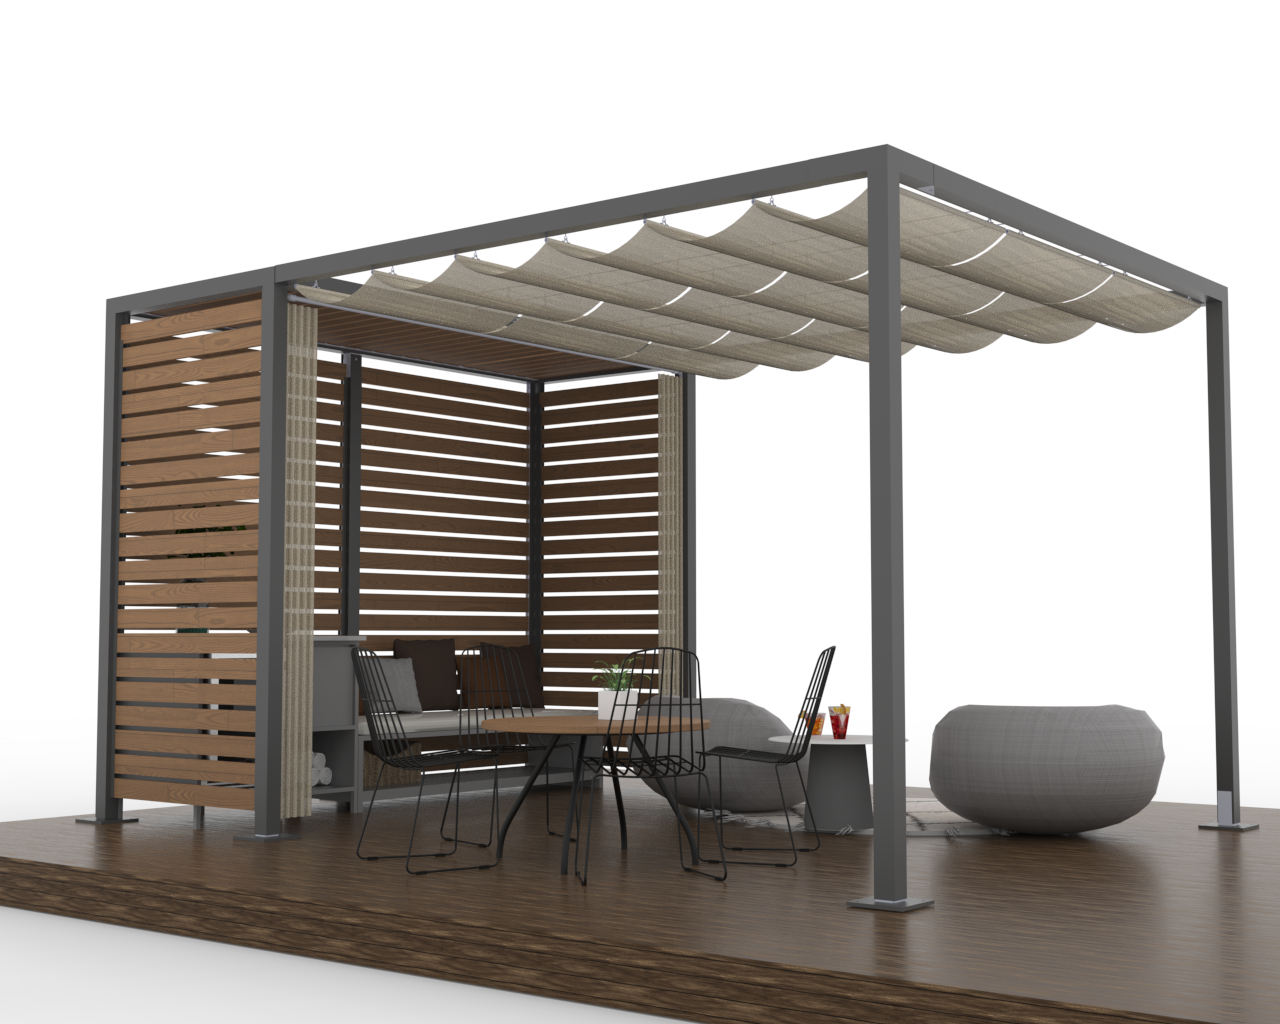 Academy Design's Siesta cabana, perspective view, showcasing its corrosion-resistant 6061-T6 aluminum frame with a slide-on-wire roof made of marine-grade woven vinyl fabric. The sides blend open air with a slat system, while the interior boasts full privacy curtains made of marine-grade upholstery fabric, offering luxury and style for outdoor spaces.